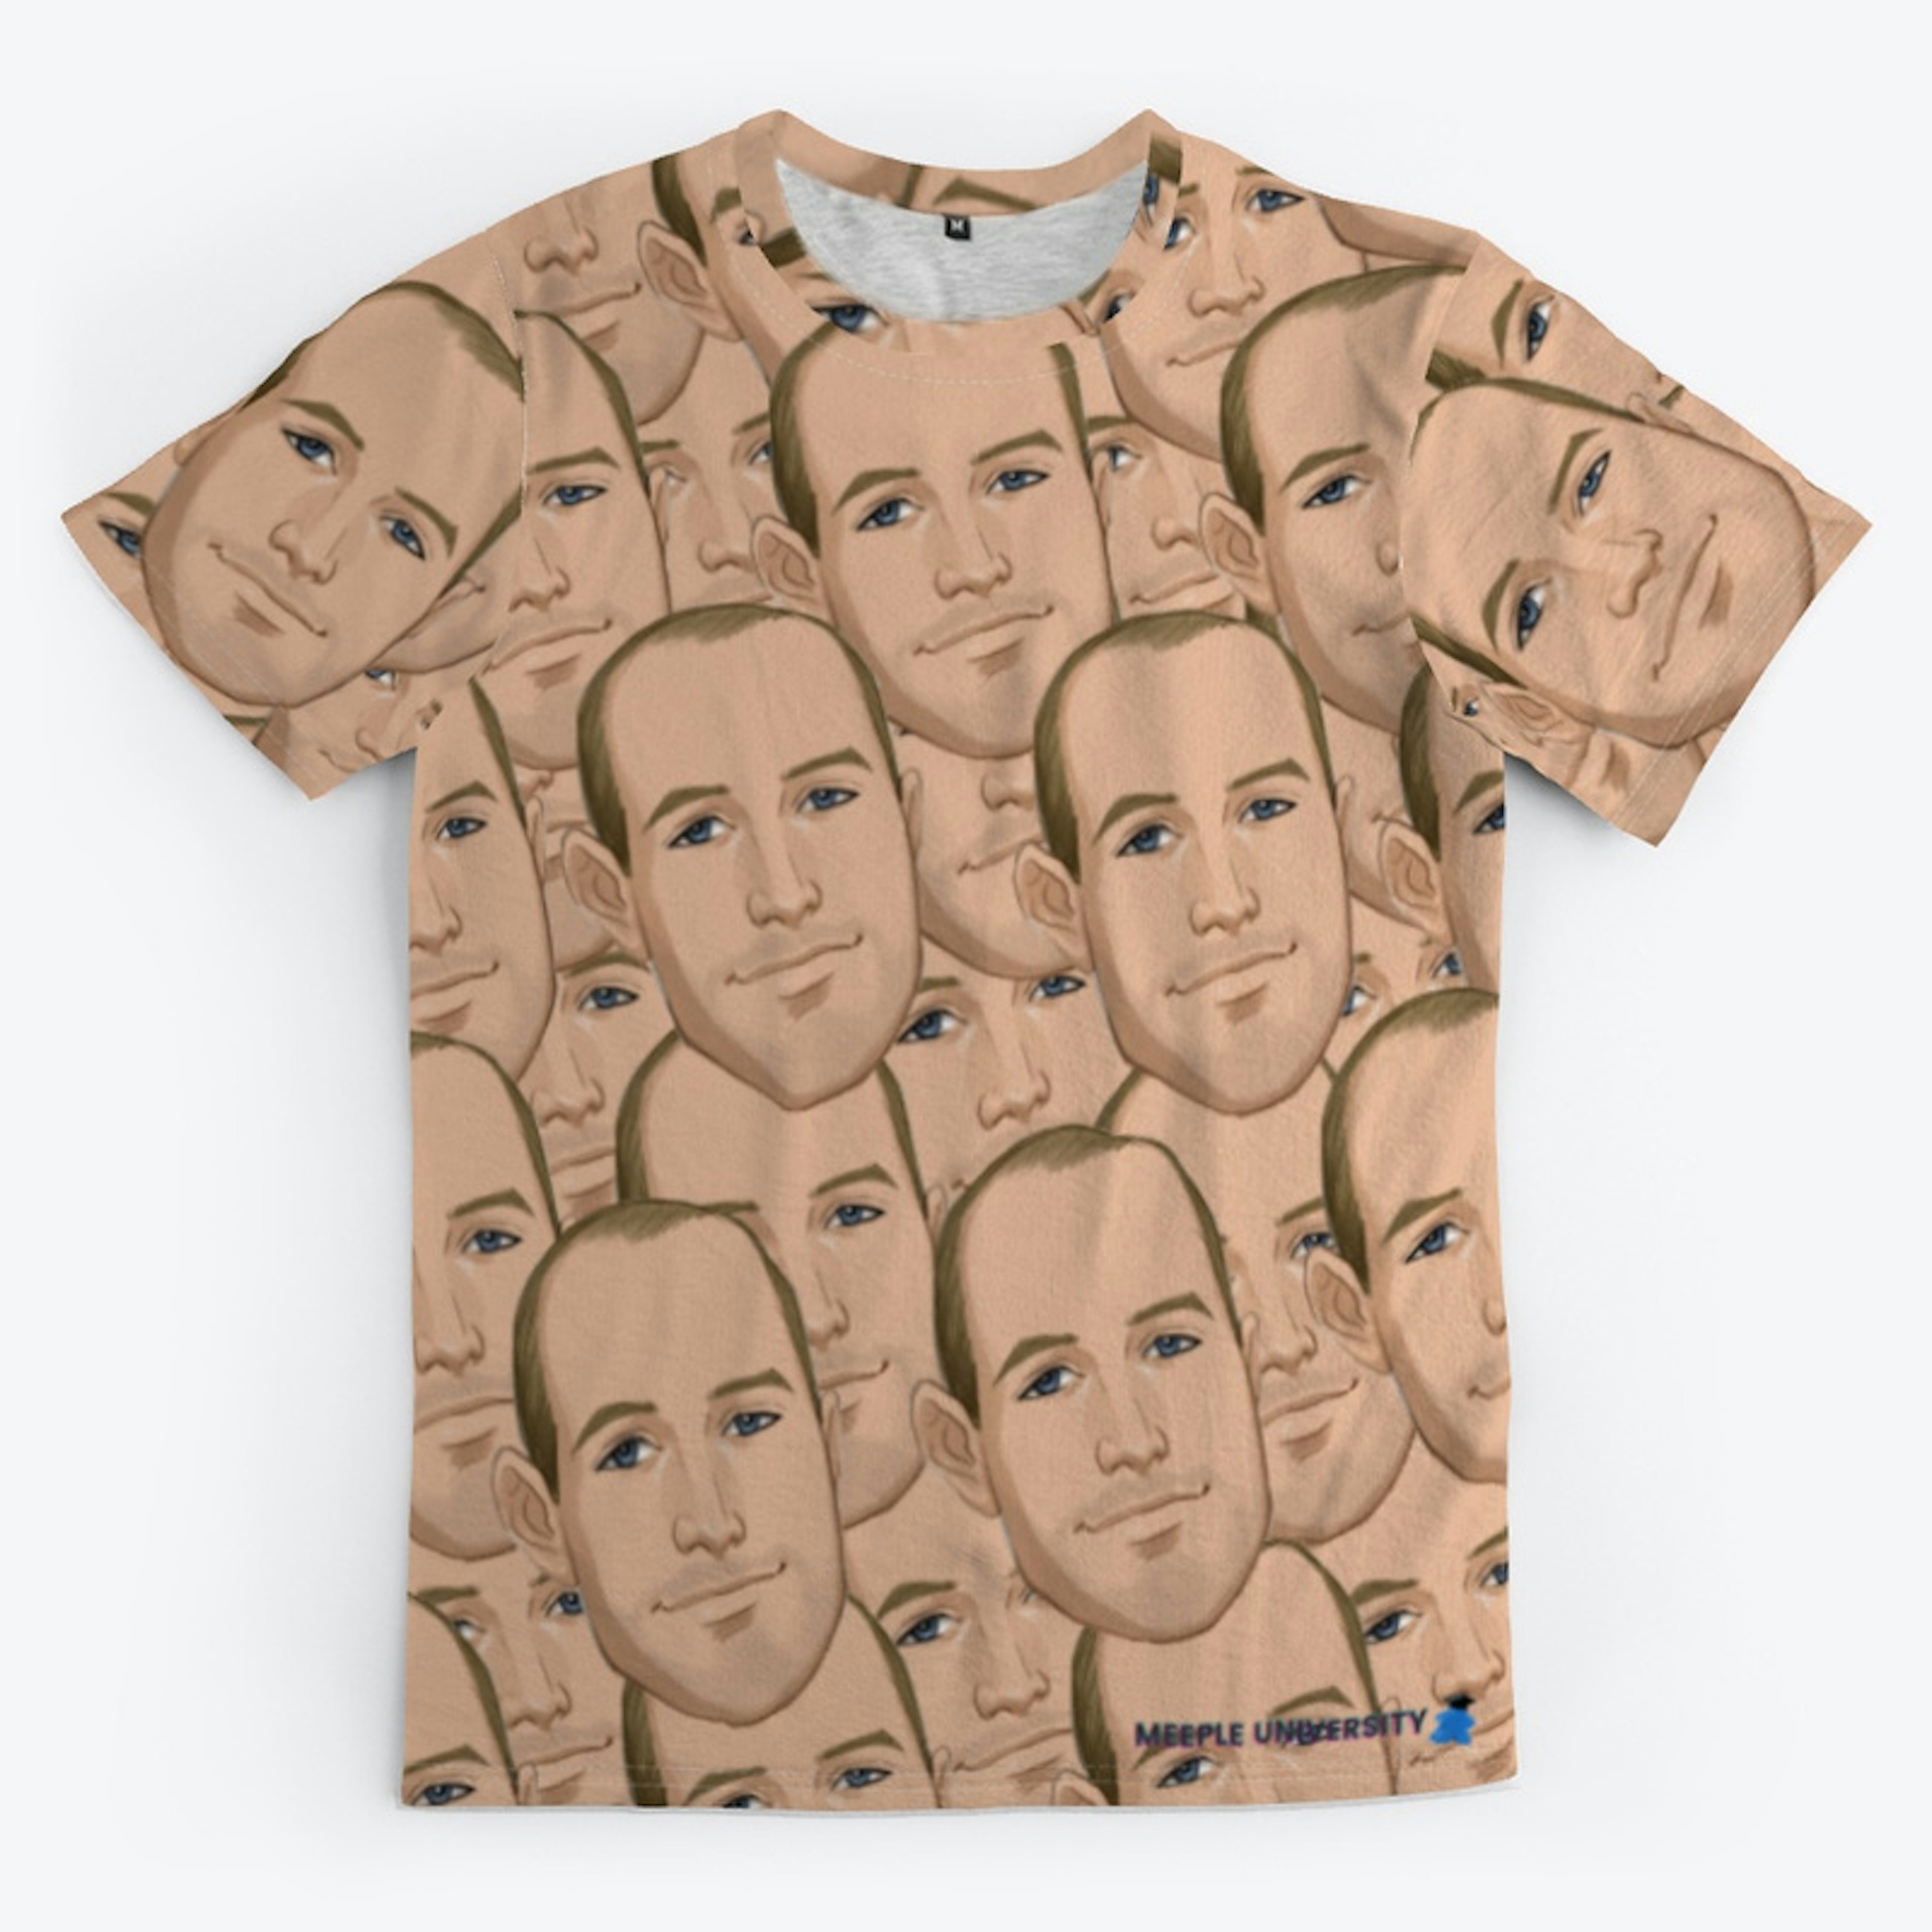 The closest to Tarrant's Face Tshirt :D